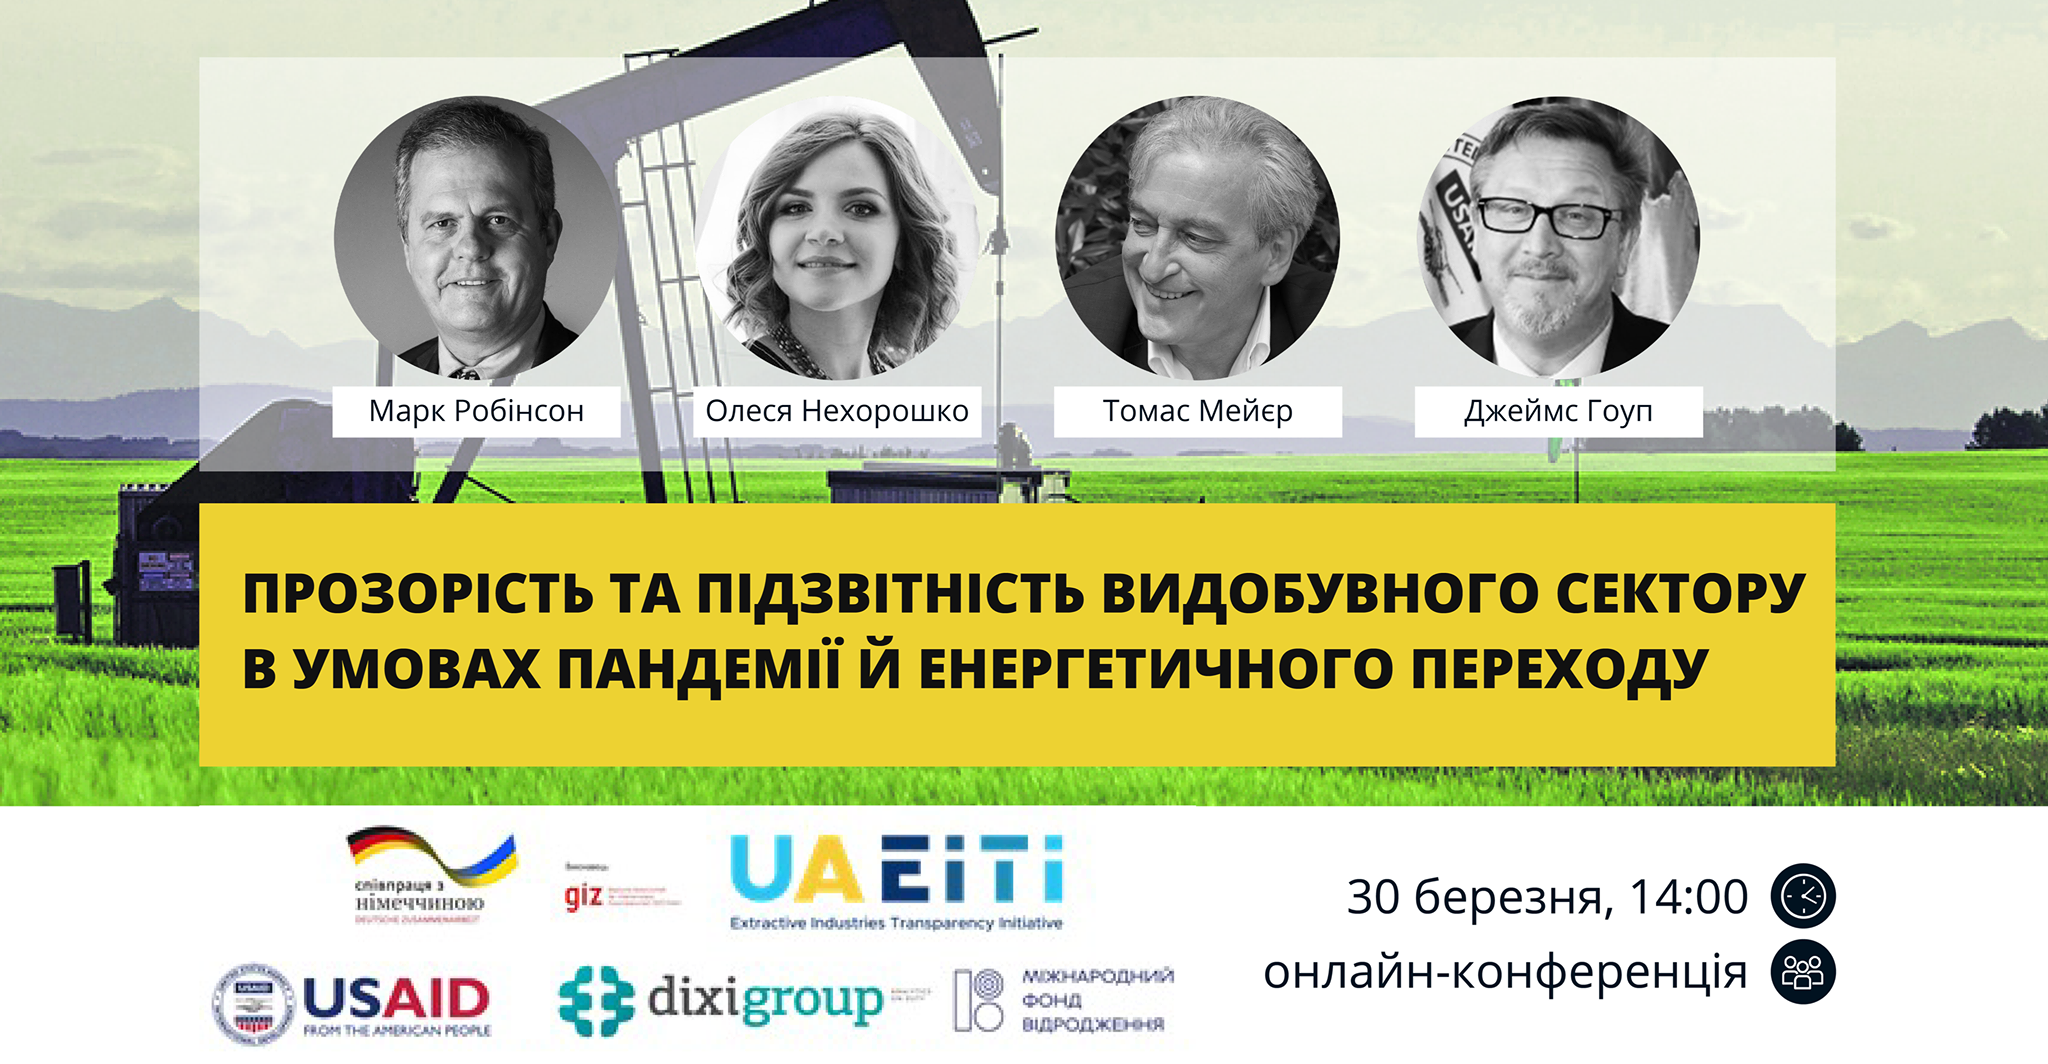  Conference “Transparency and Accountability of extractive sector during pandemic and energy transition”